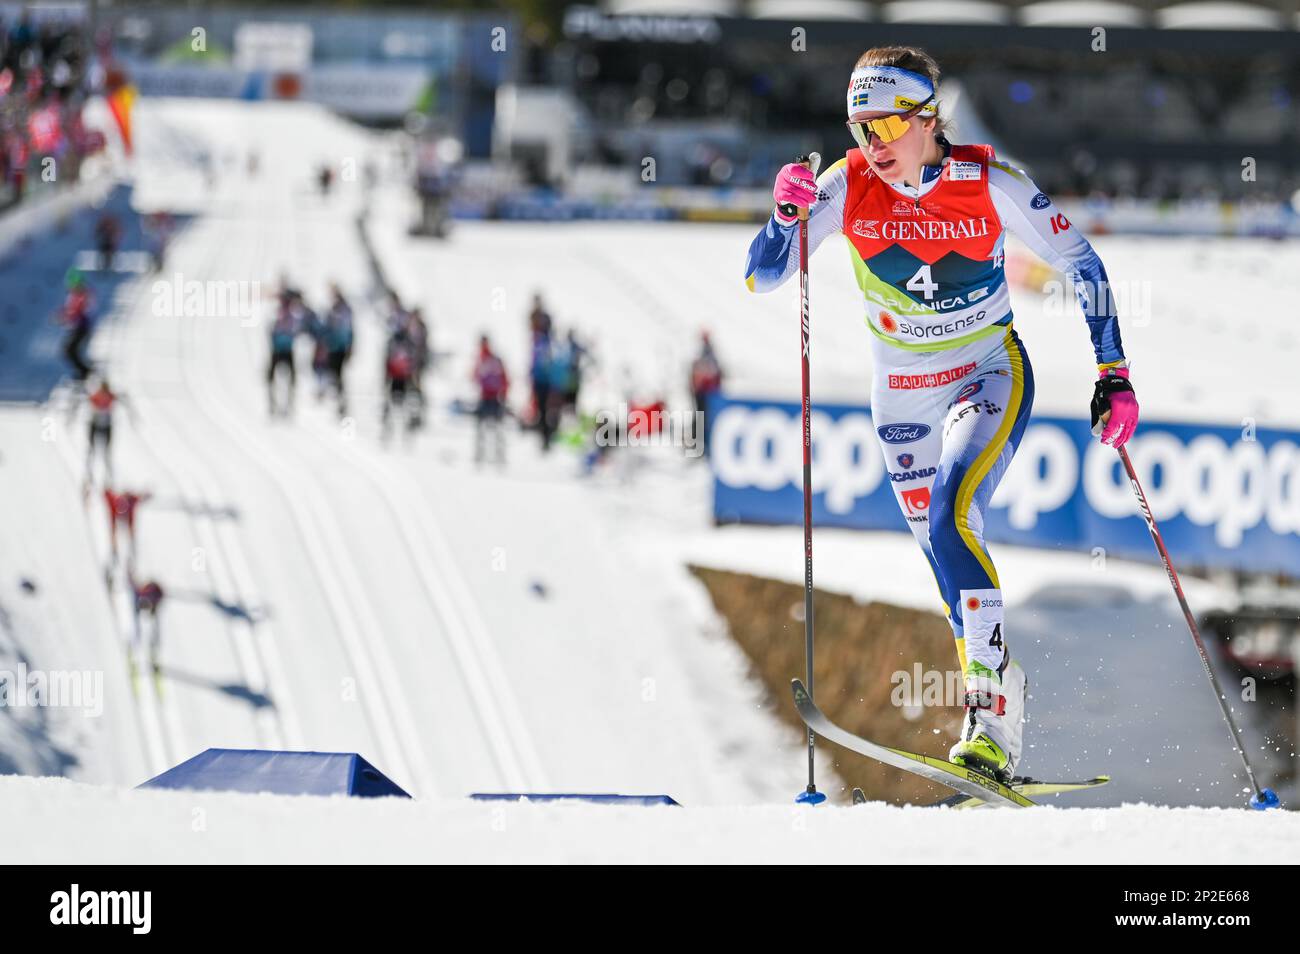 Planica, Slovenia. 4 March, 2023. Sweden's Ebba Andersson leads the women’s 30-kilometer classic race at the 2023 FIS World Nordic Ski Championships in Planica, Slovenia. She won the race. Credit: John Lazenby/Alamy Live News Stock Photo